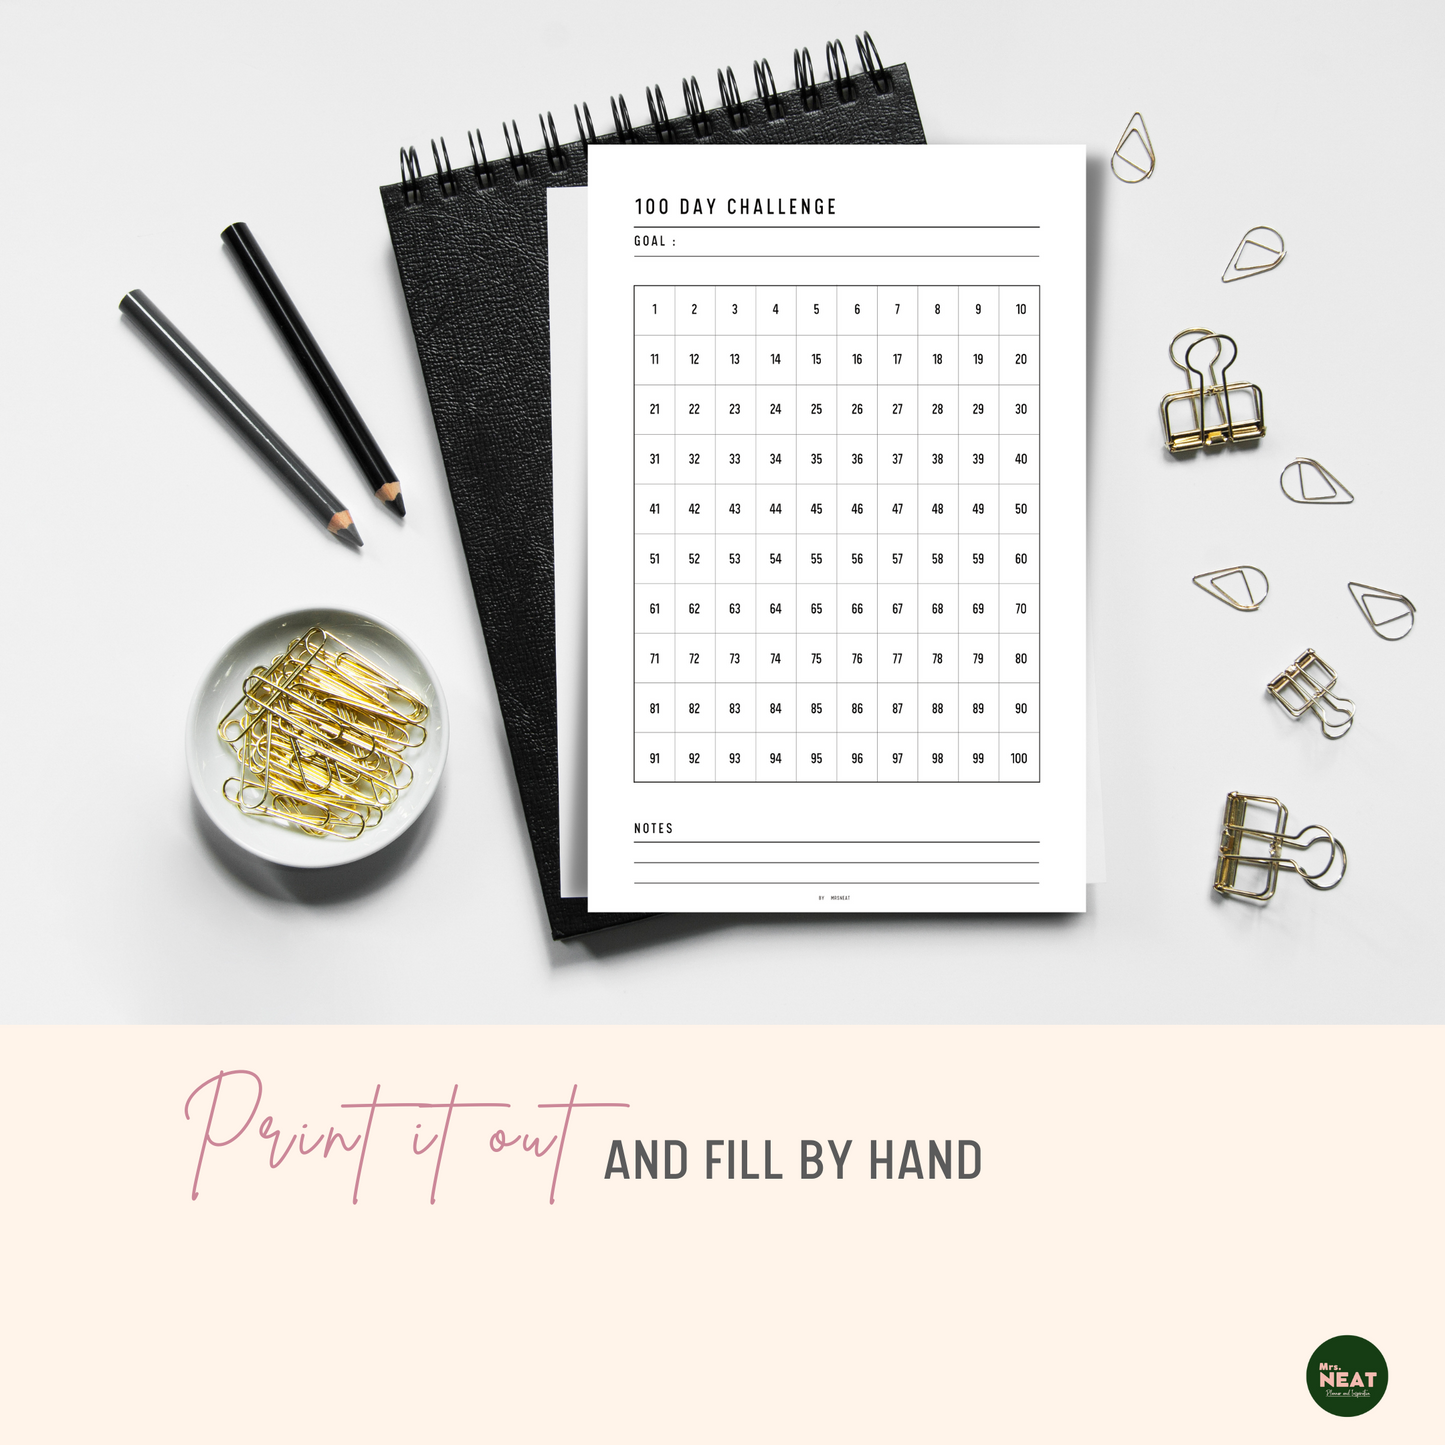 100 Day Challenge Habit Tracker Printable Planner printed out on the paper